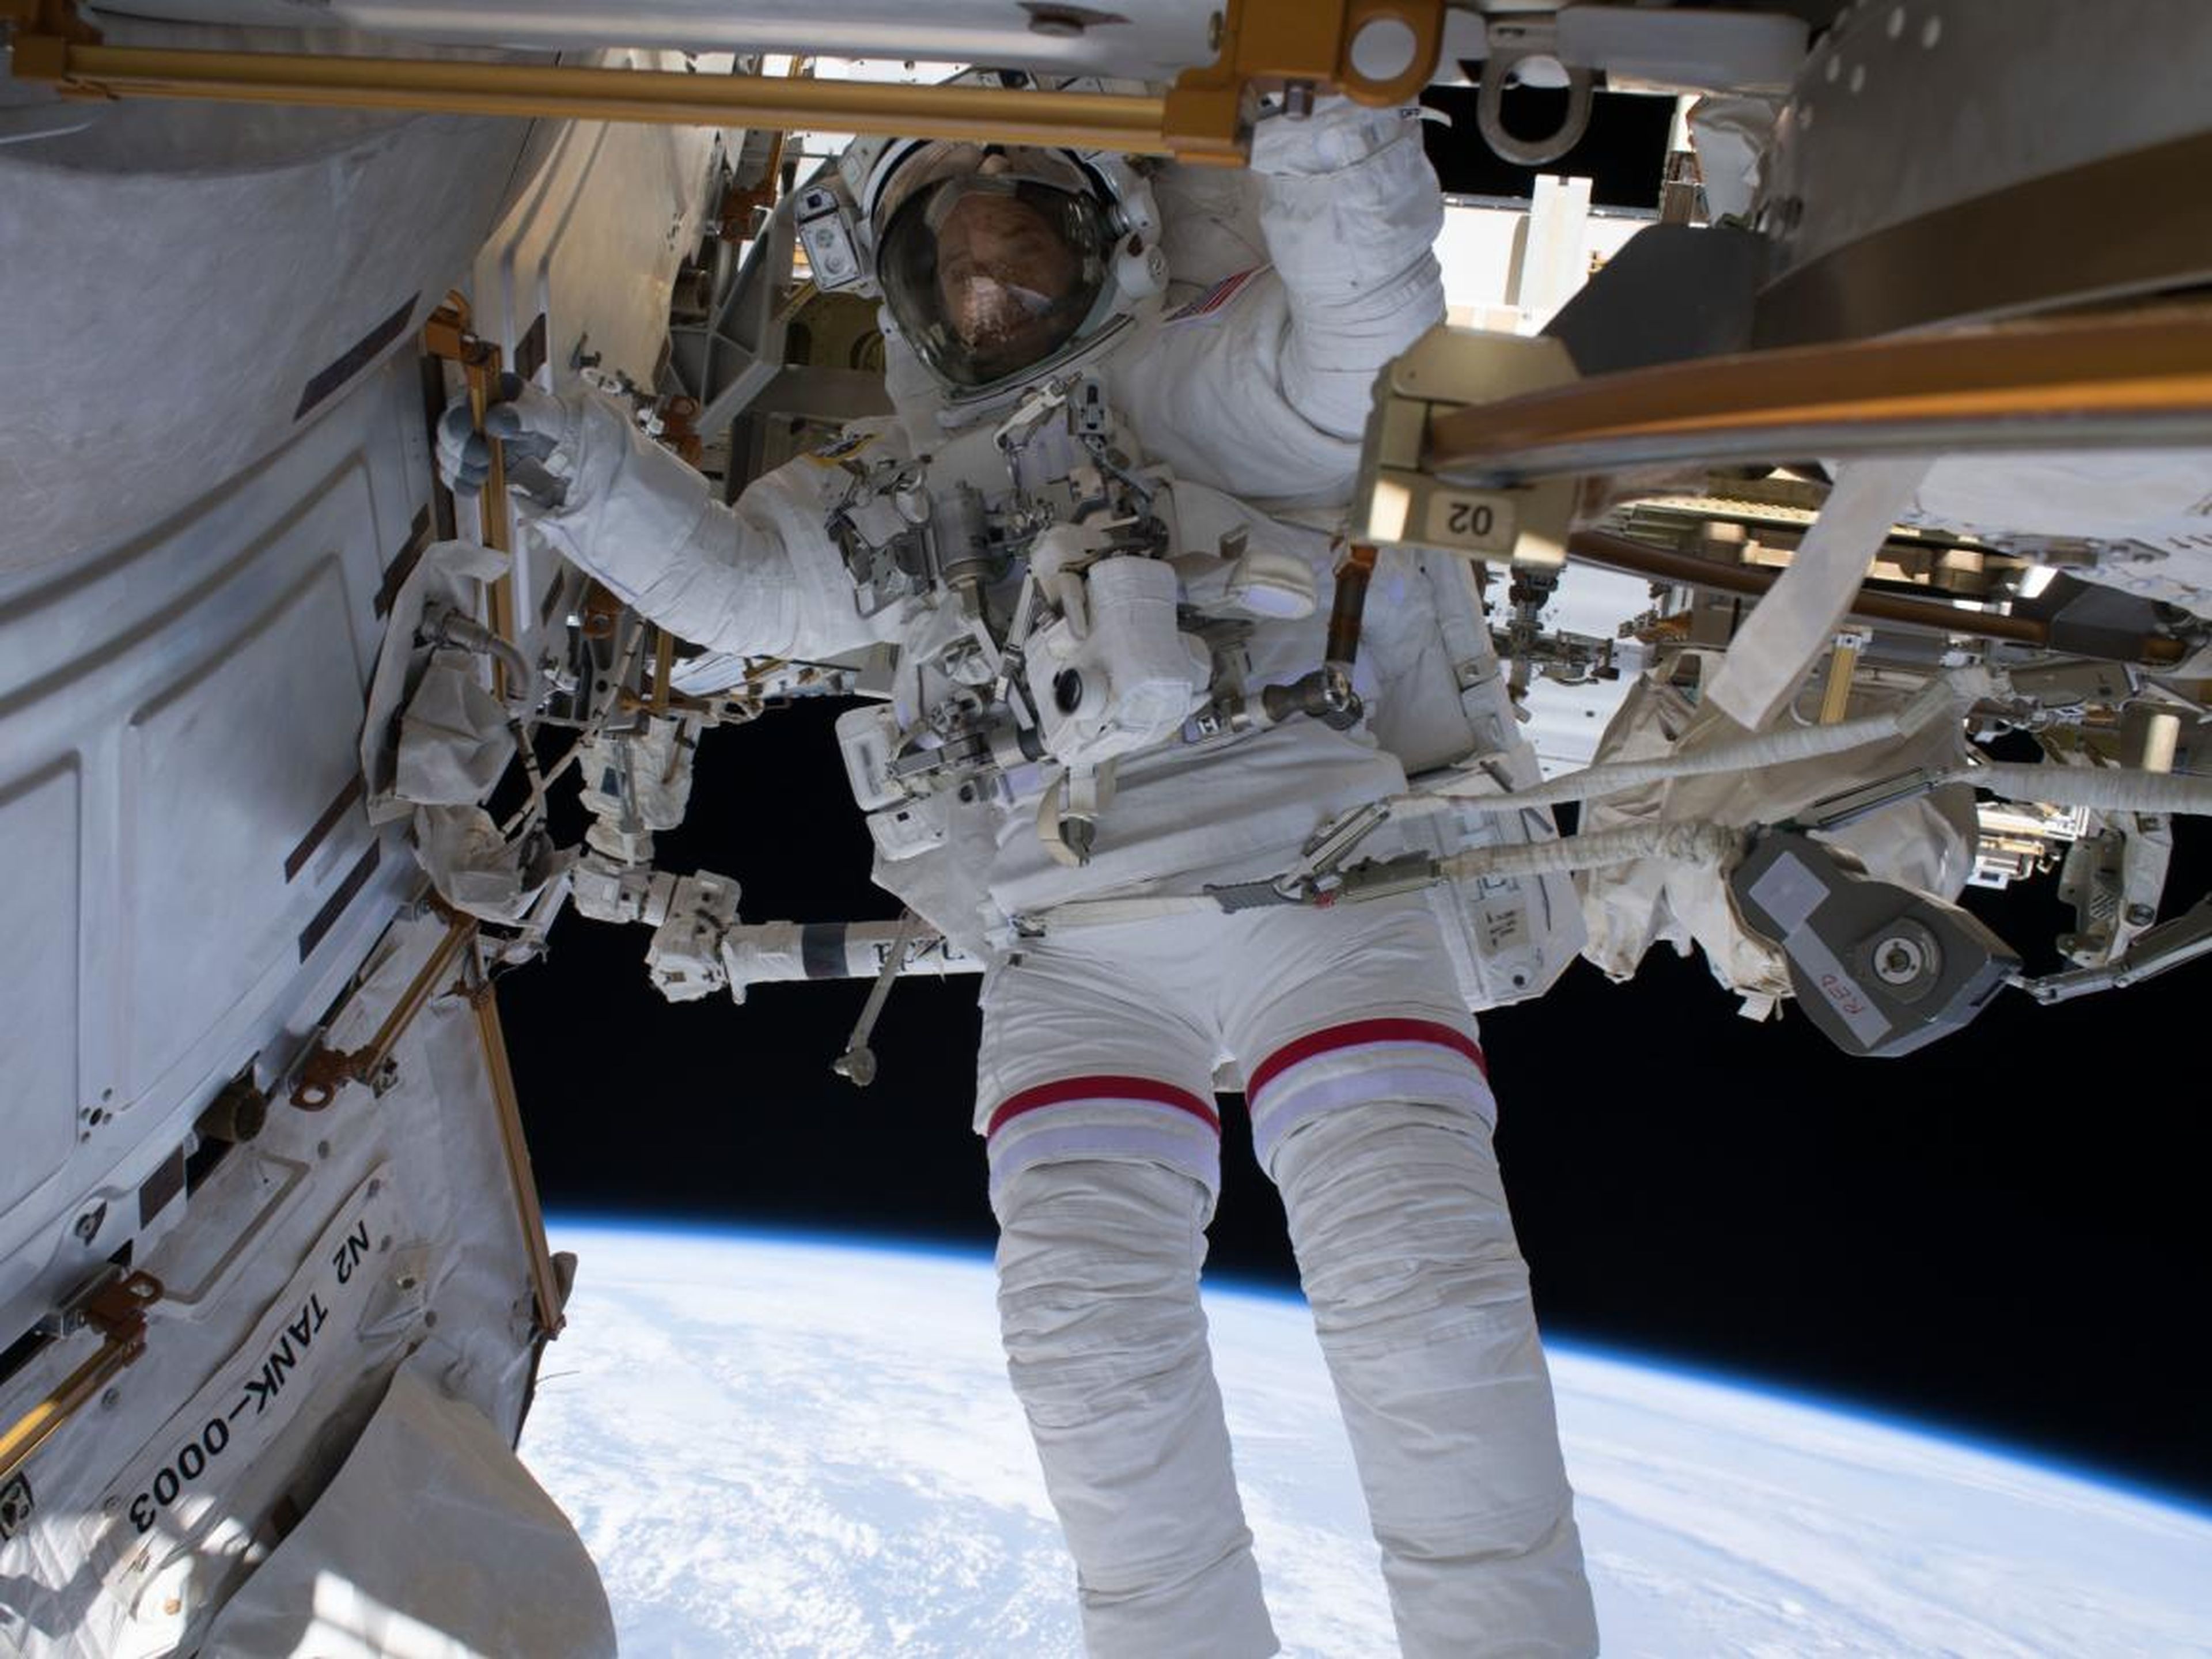 NASA astronaut Ricky Arnold is pictured during a spacewalk on June 14, 2018.